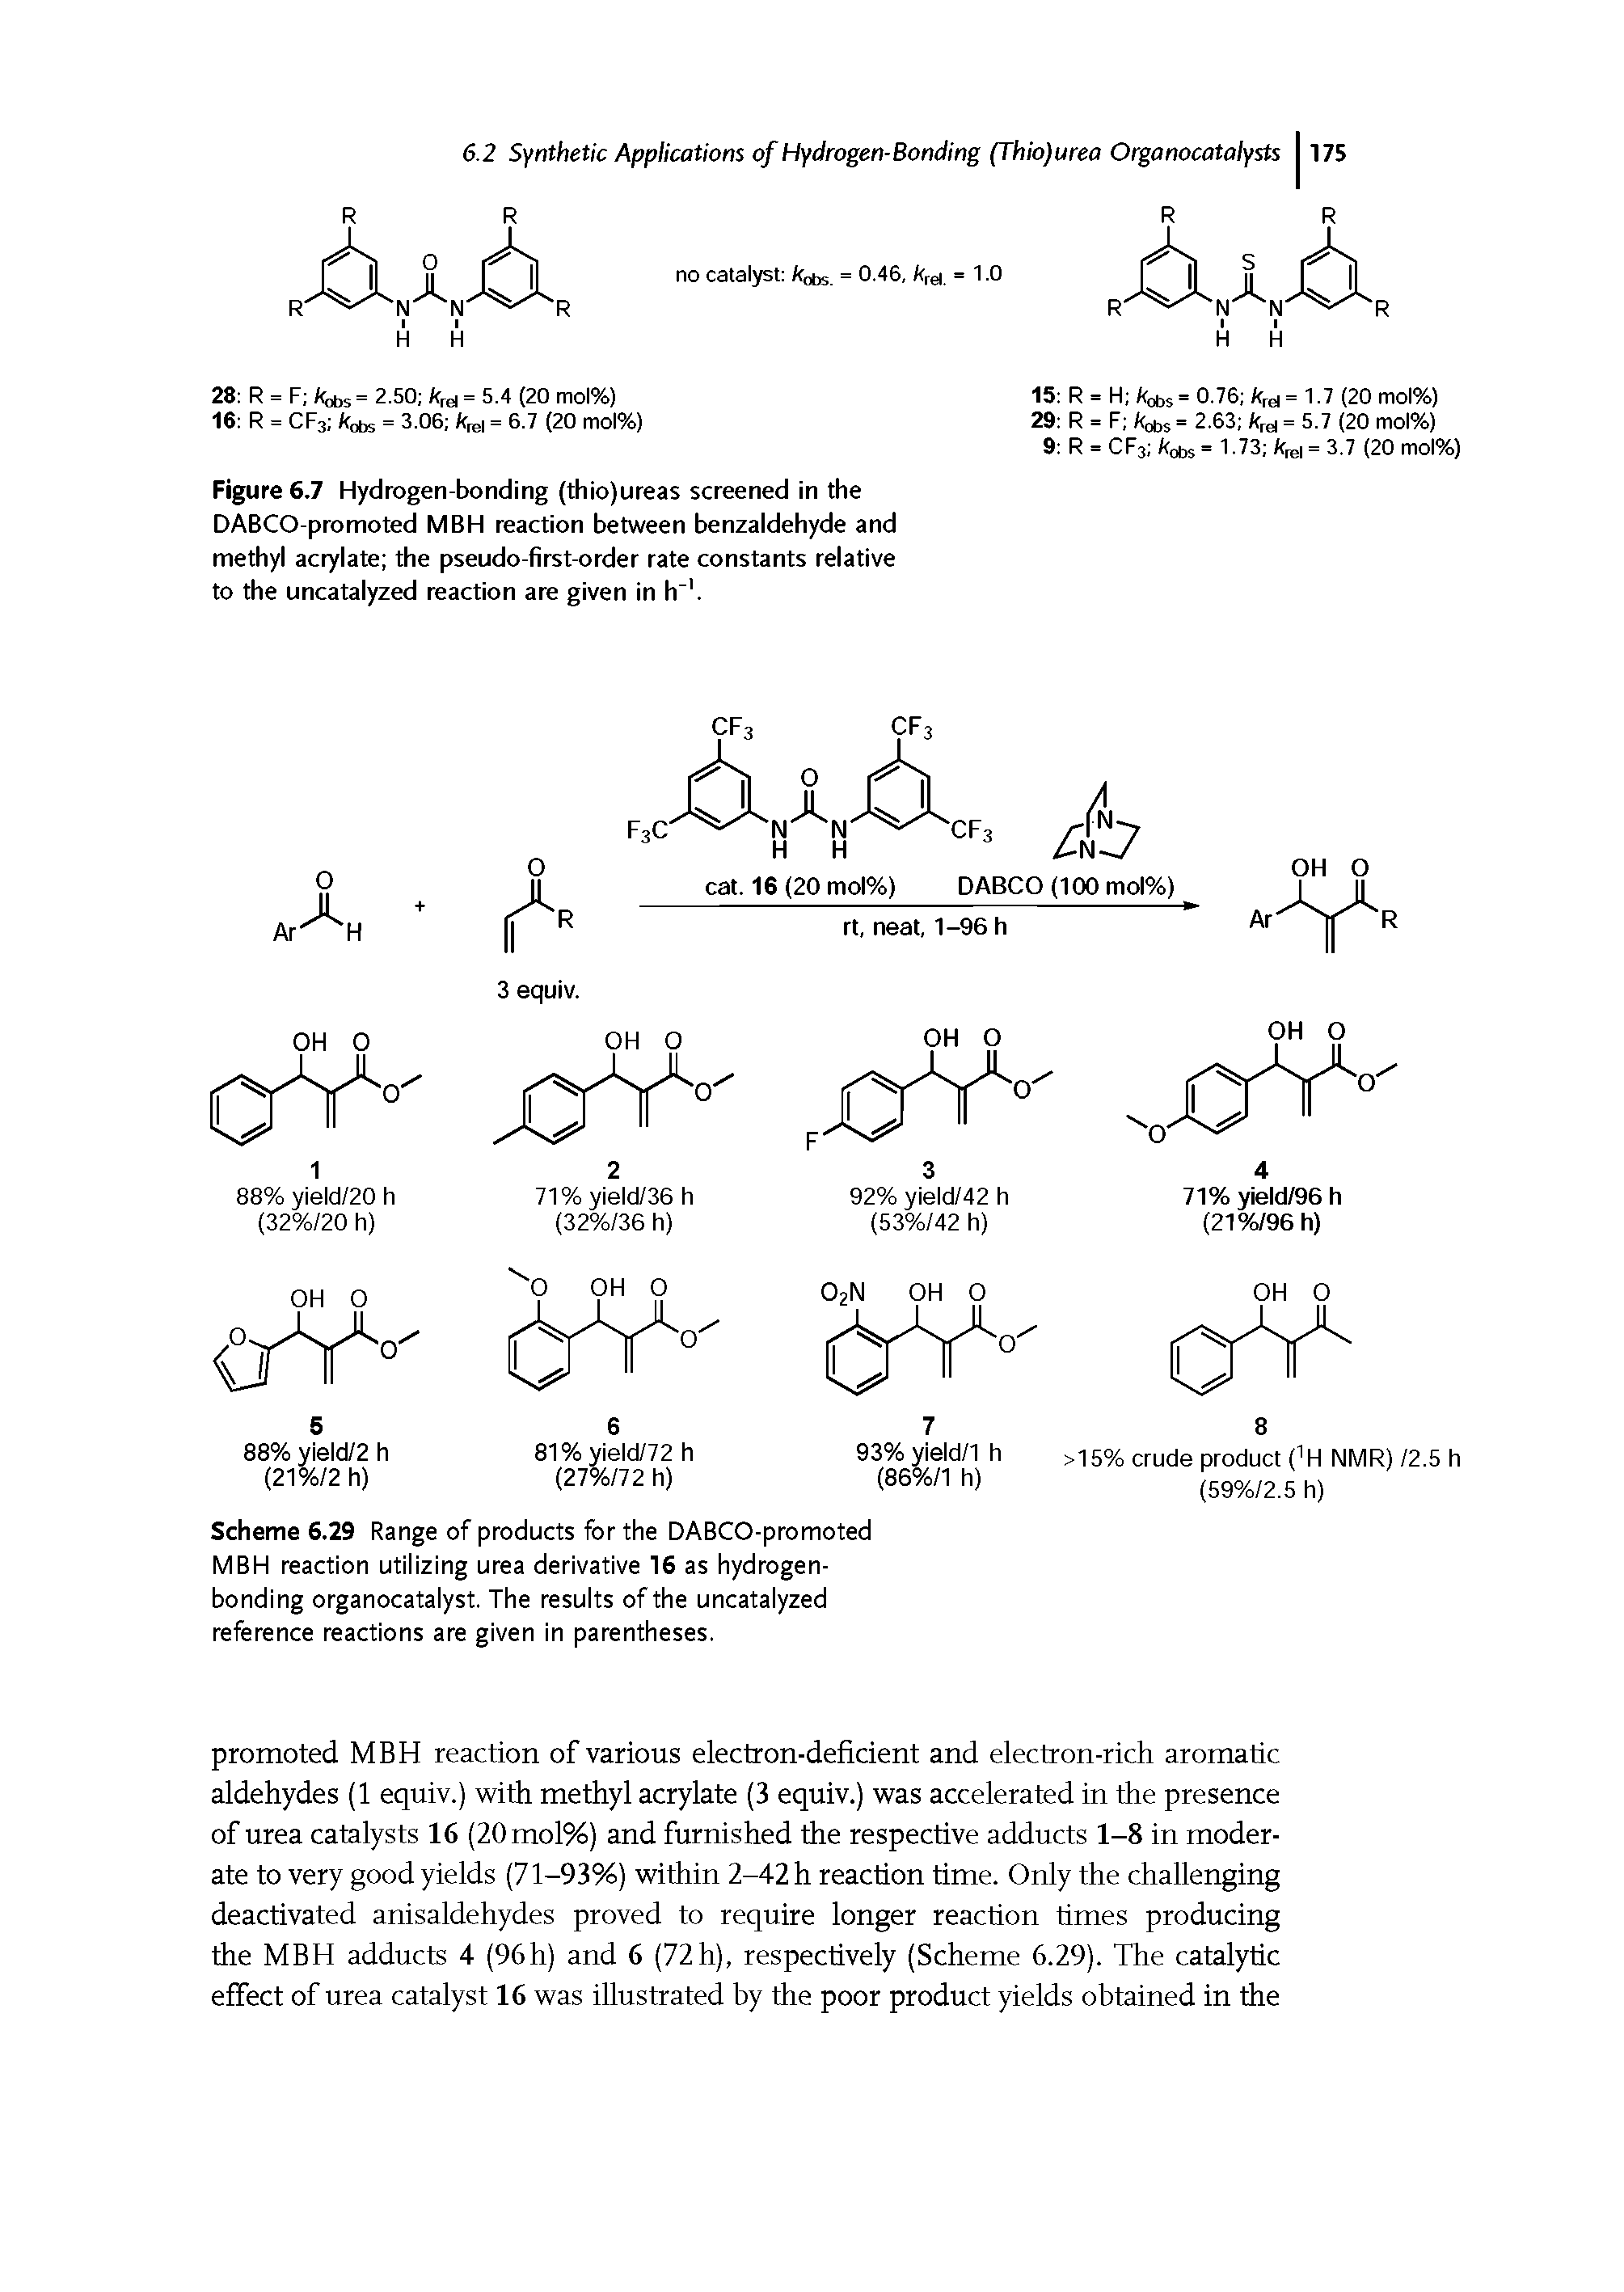 Scheme 6.29 Range of products for the DABCO-promoted MBH reaction utilizing urea derivative 16 as hydrogenbonding organocatalyst. The results of the uncatalyzed reference reactions are given in parentheses.